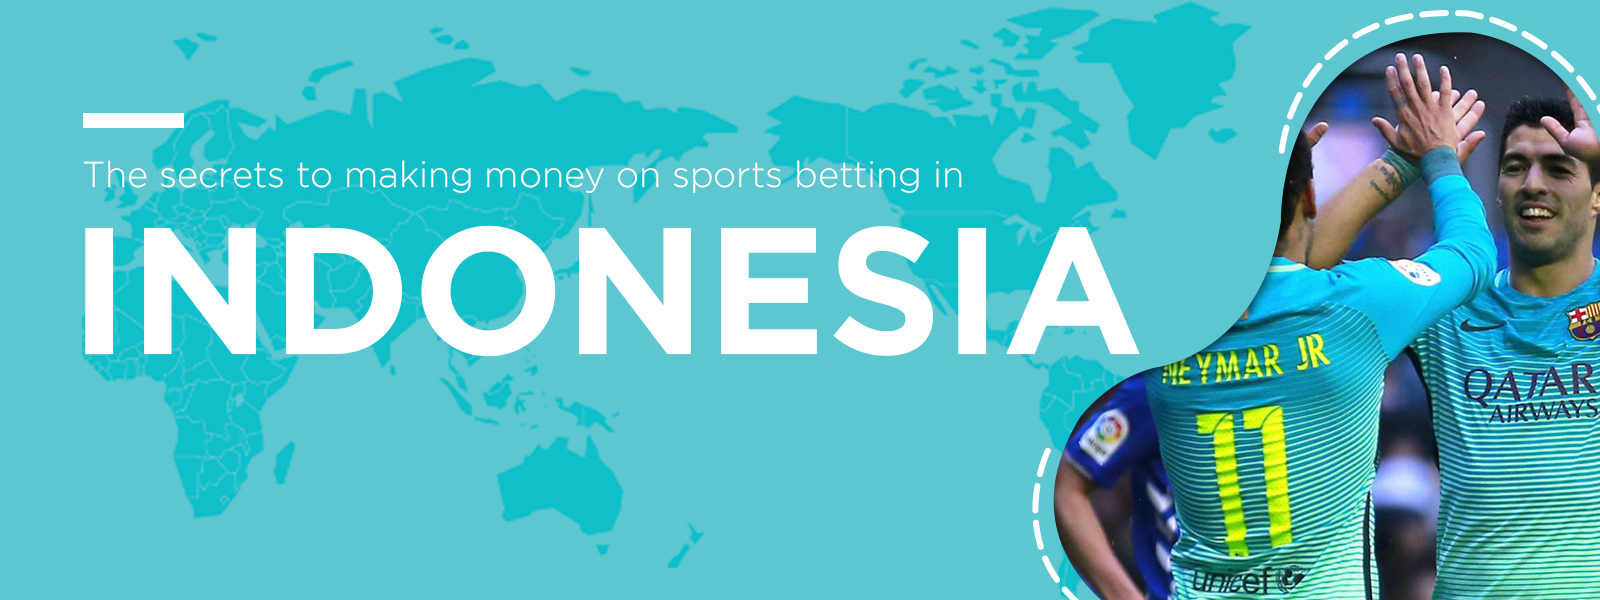 Believing Any Of These 10 Myths About asian bookies, asian bookmakers, online betting malaysia, asian betting sites, best asian bookmakers, asian sports bookmakers, sports betting malaysia, online sports betting malaysia, singapore online sportsbook Keeps You From Growing